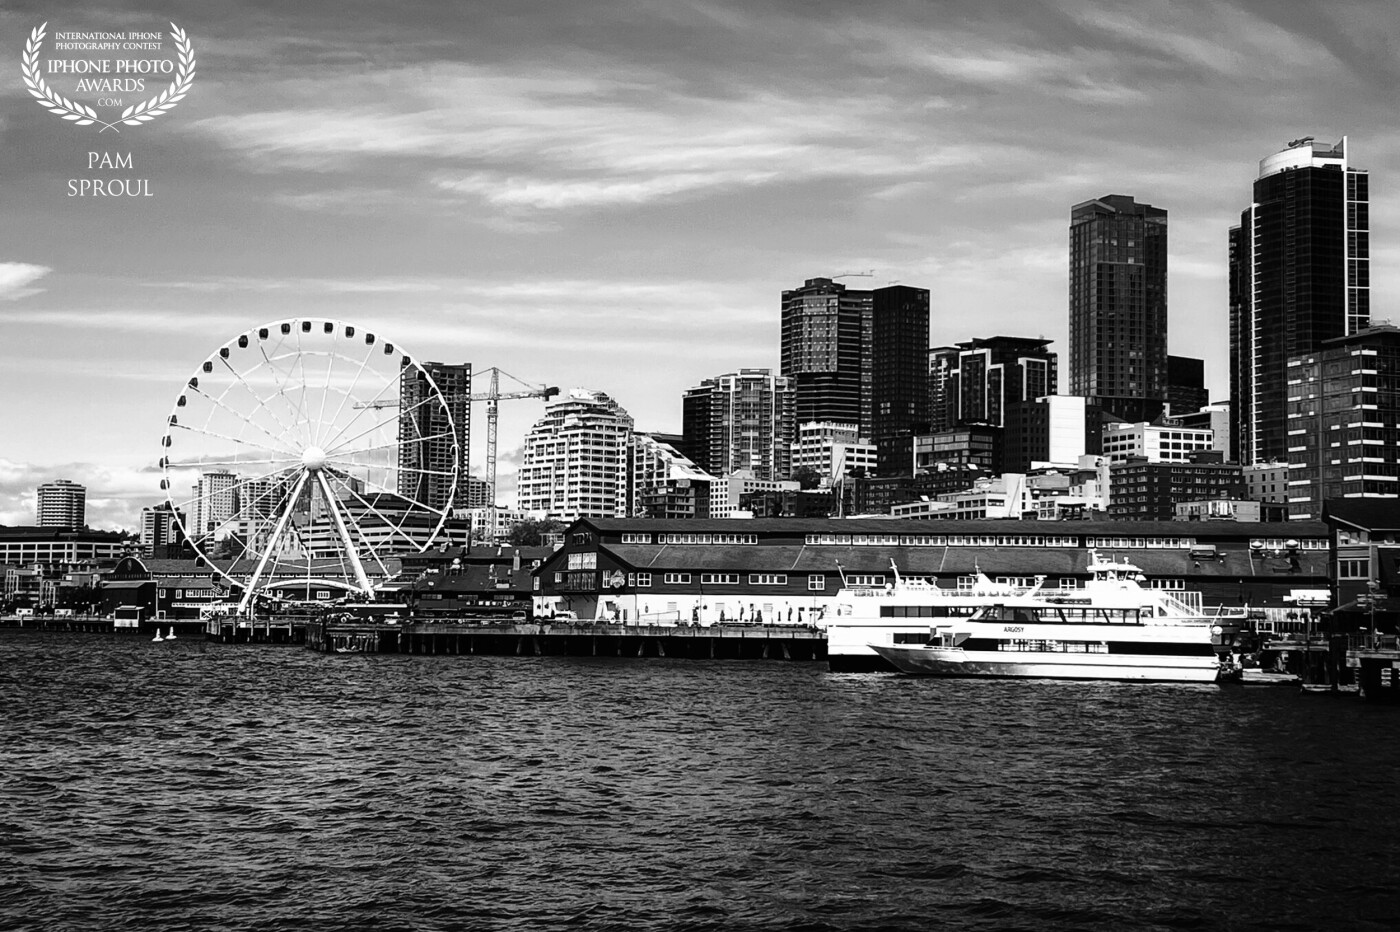 Grateful for the views from the ferry of the Seattle Waterfront that are ever changing. <br />
The Big Wheel set against the diverse buildings and the sky were perfect for a black and white capture with my iPhone <br />
<br />
#Seattle Waterfront Sky -2022